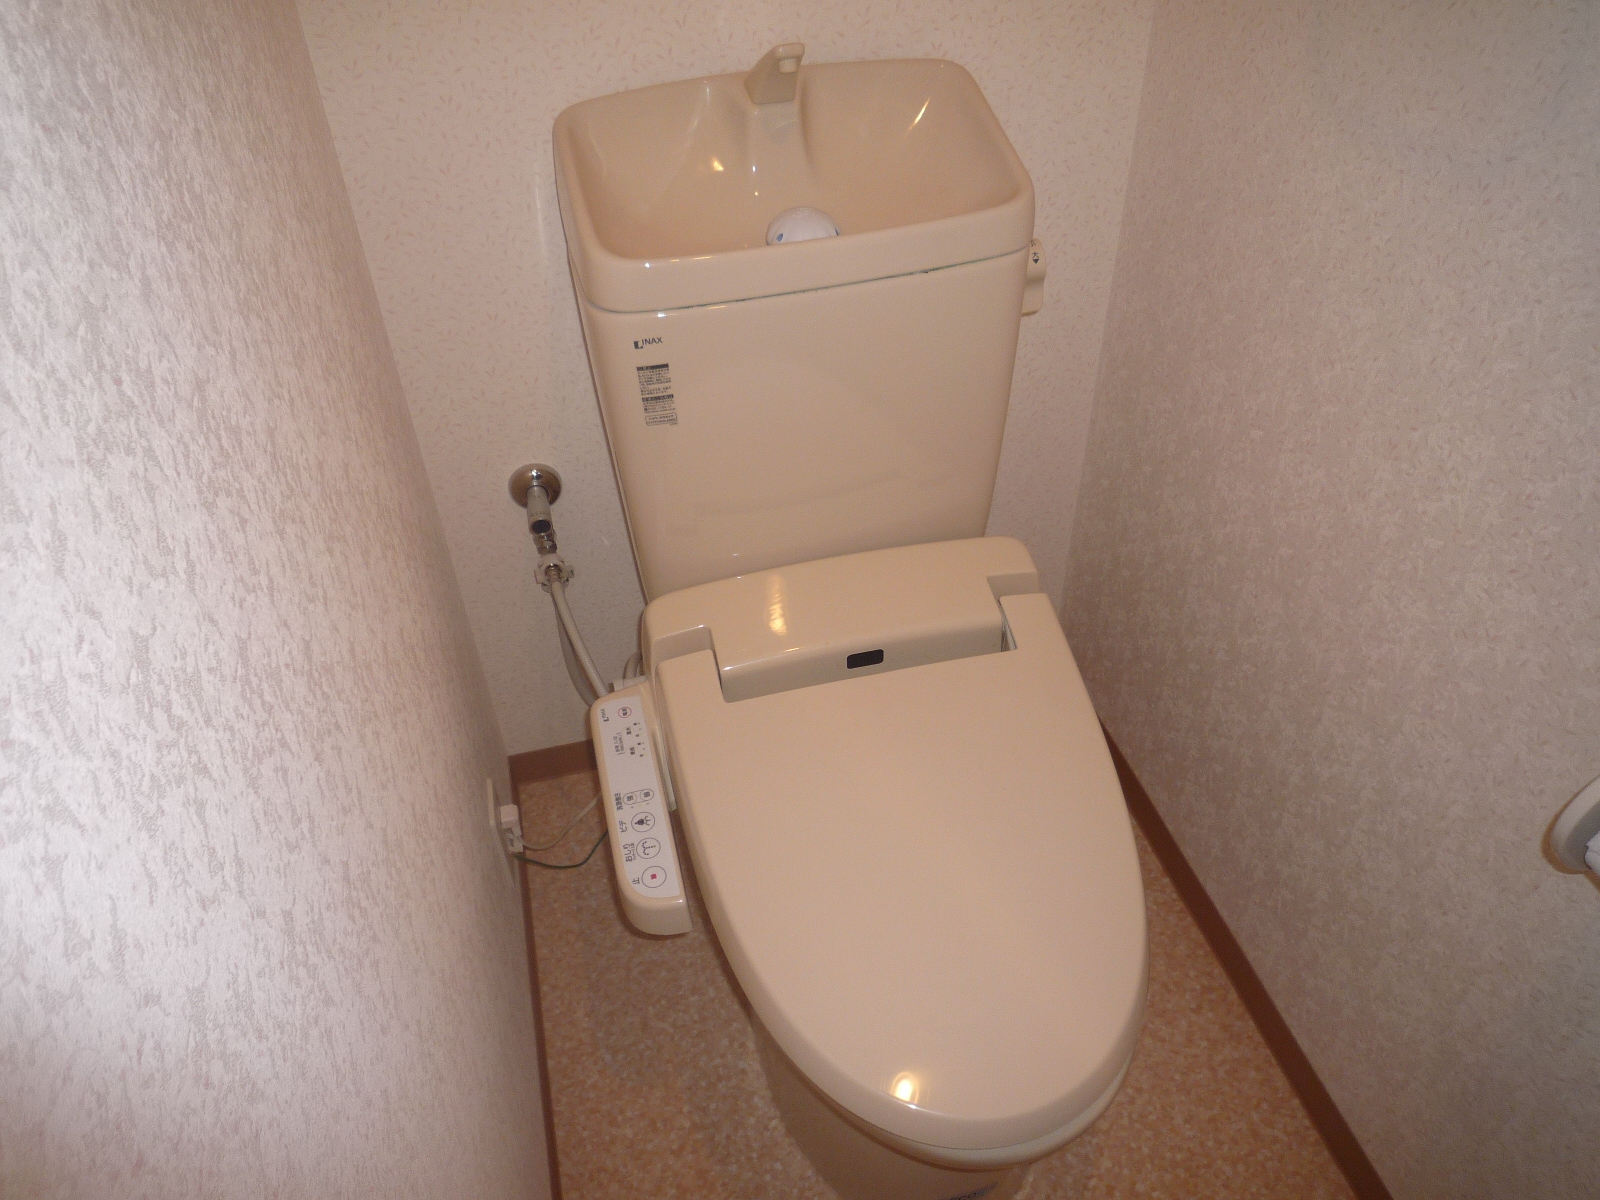 Toilet. We are also firmly equipped with Washlet.